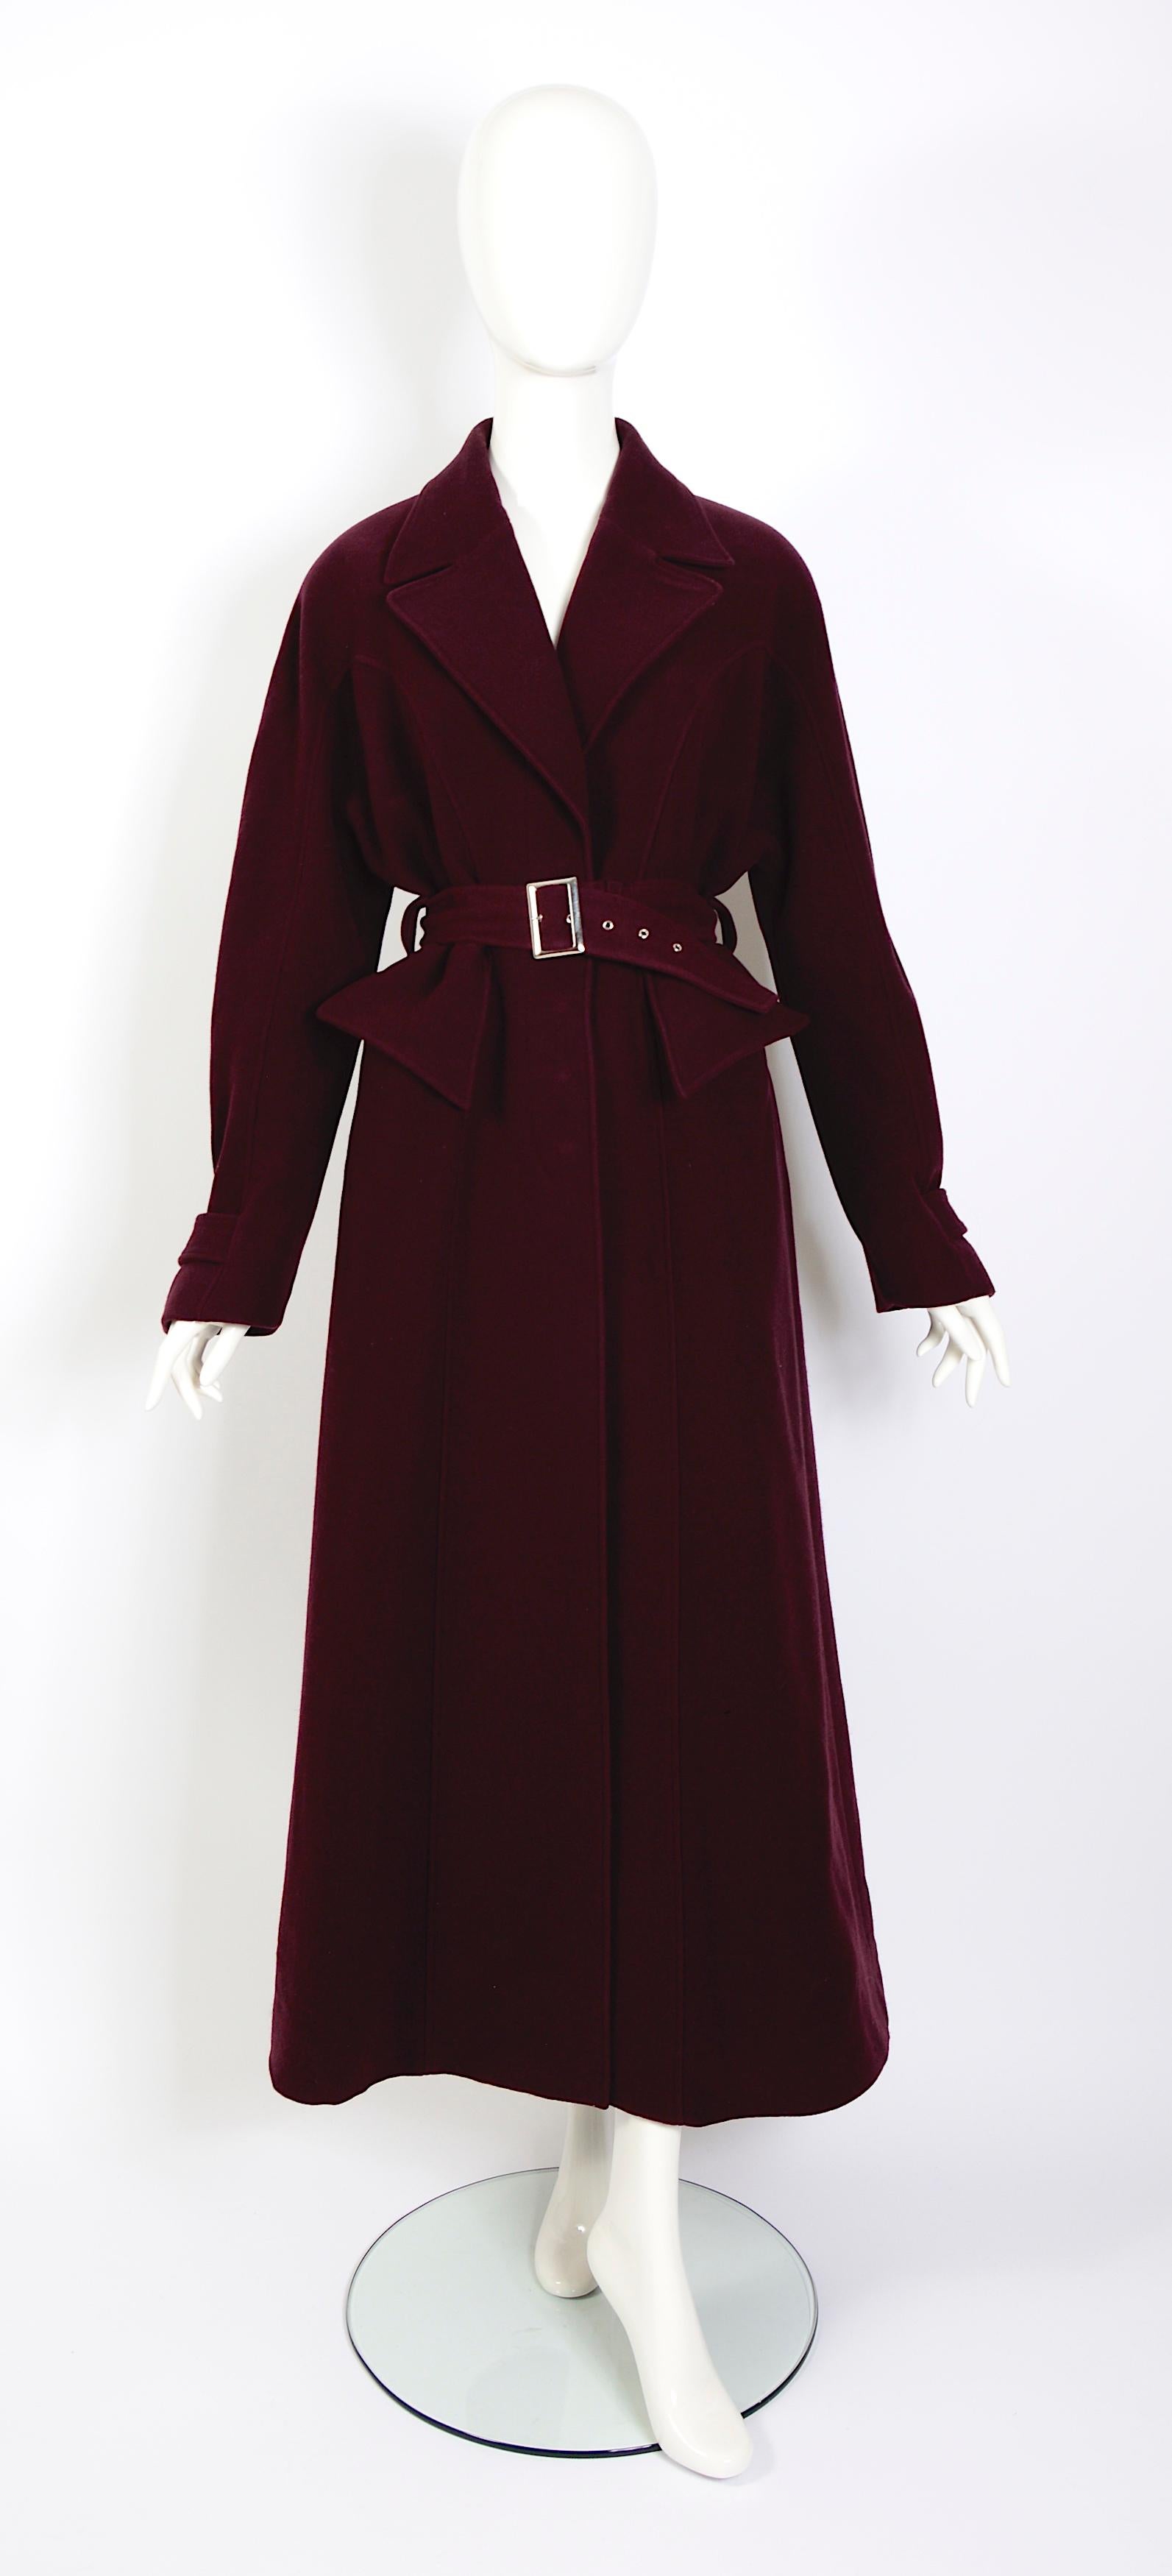 Amazing burgundy 100% wool long/maxi coat by Thierry Mugler for Mugler.
100% Wool - lining acetate - Made in France - French size 42
Our doll is size 36. Personally, I find the coat would work for a size 38 up to 42
Unbelted waist measurement